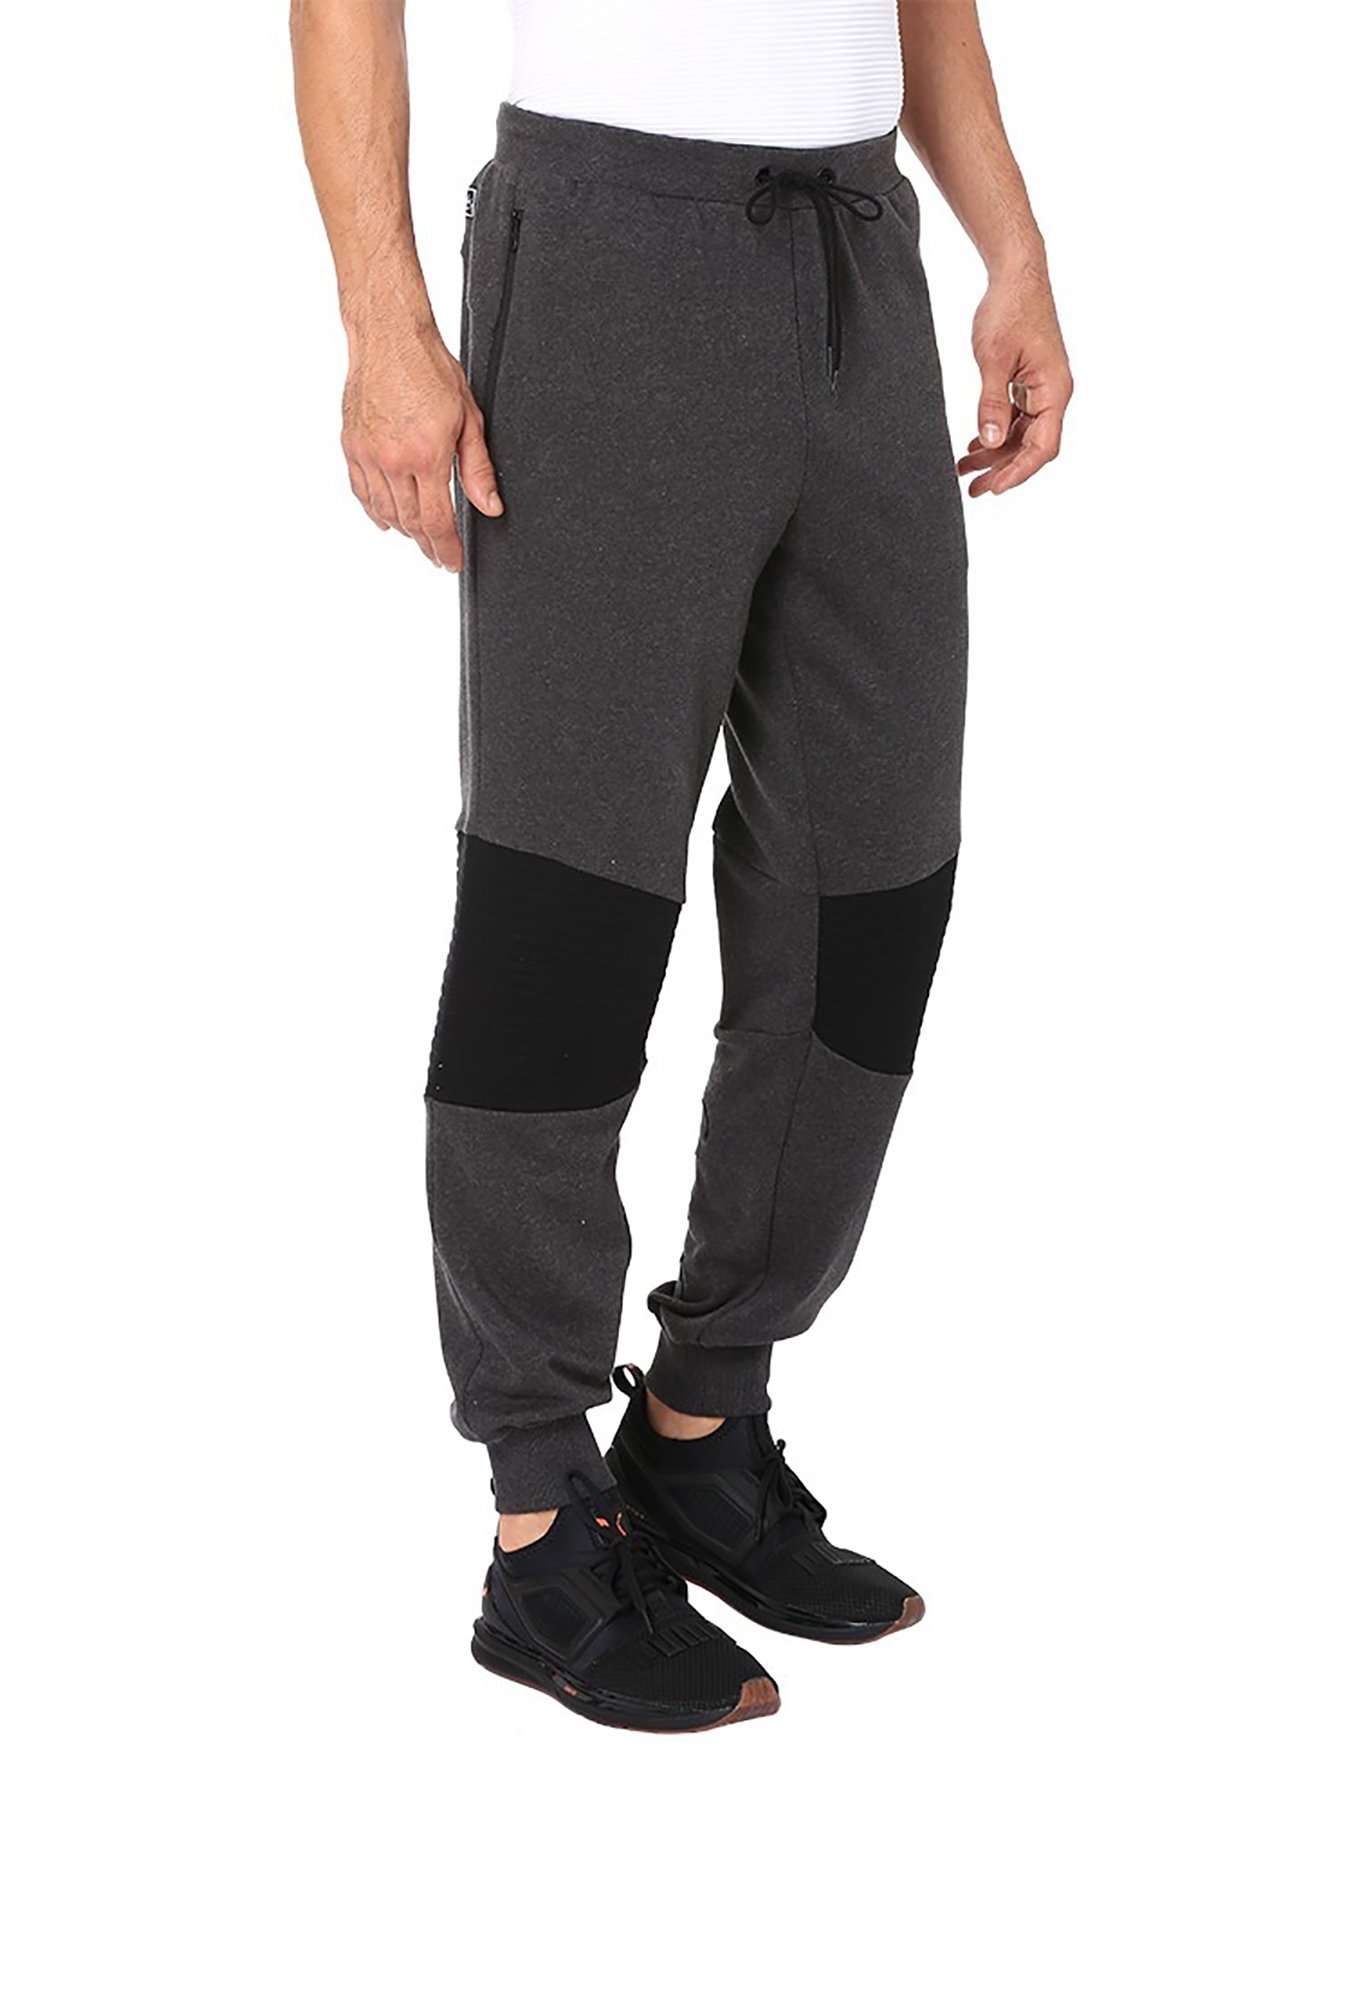 Puma Vk One8 Knitted Black Track Pants 5878428.htm - Buy Puma Vk One8  Knitted Black Track Pants 5878428.htm online in India